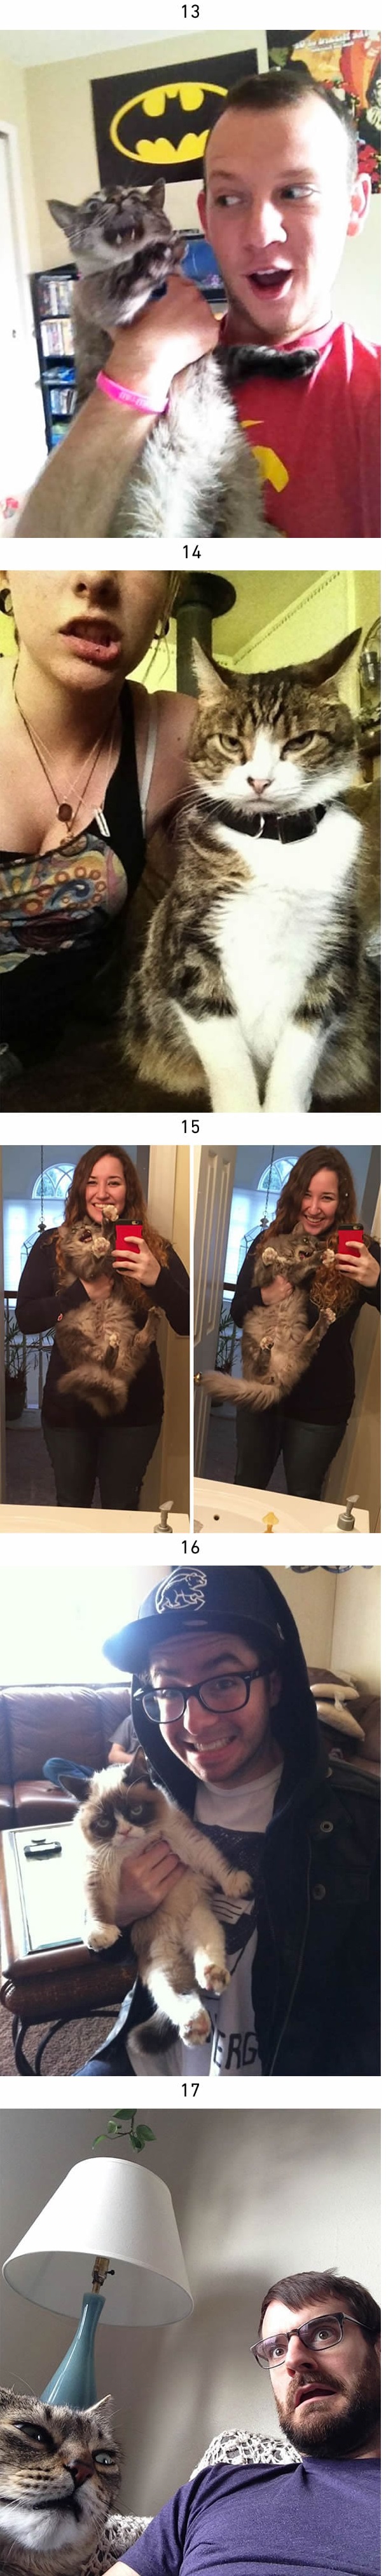 cats annoyed with selfies 3